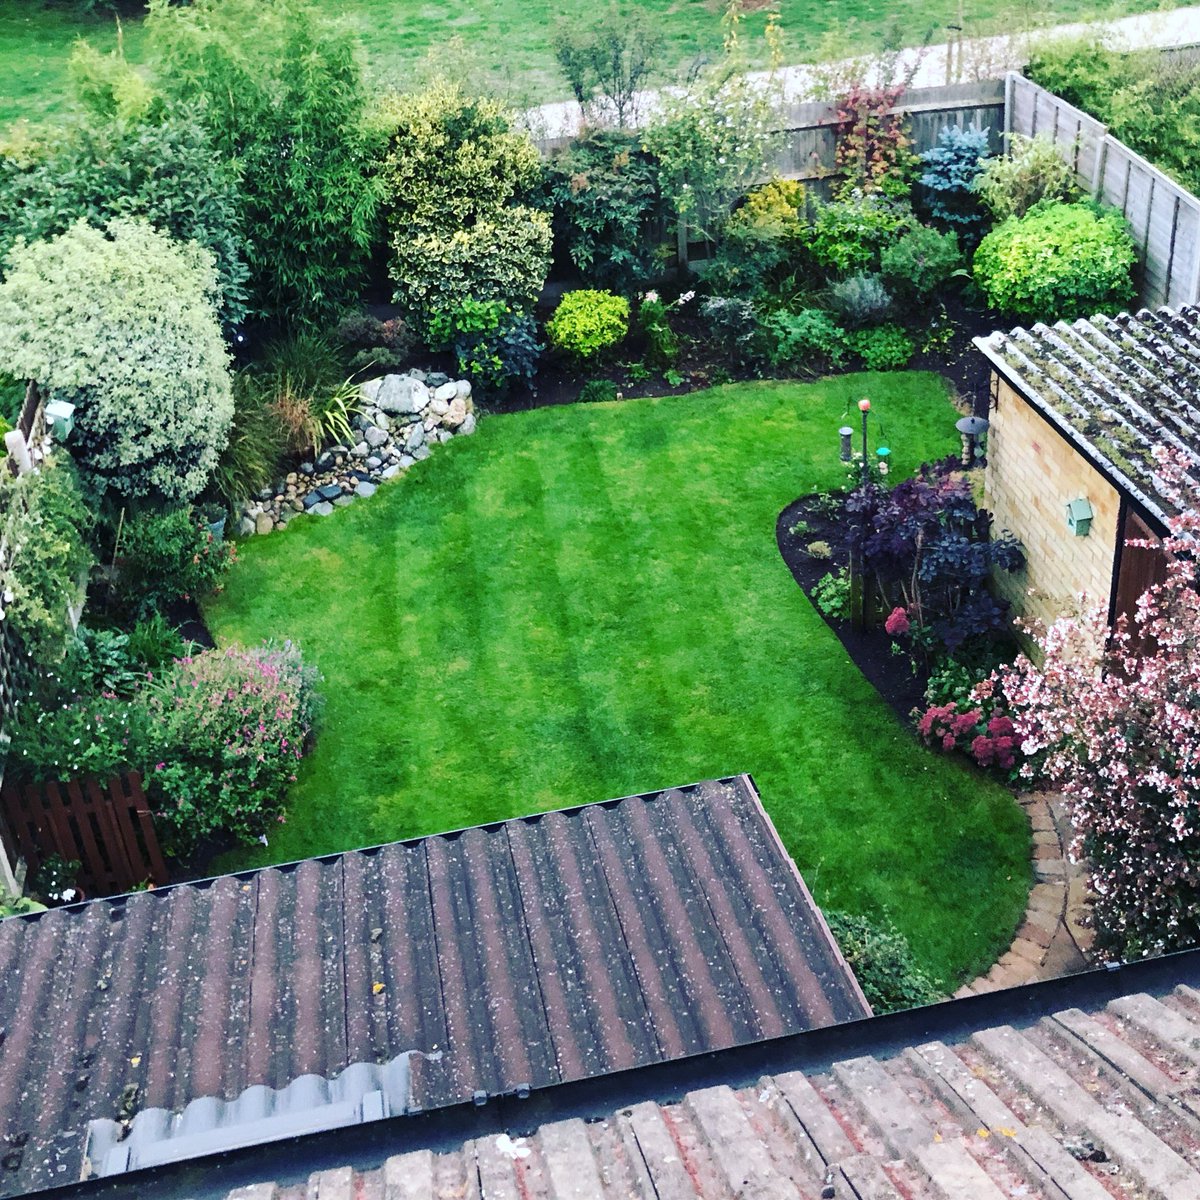 Spent the day sorting the garden out! Shattered now! X #singer #vocalharmony #instasinger #picoftheday #instadailyphoto #model #instapic #actor #london #uk #singing #tour #album #bristolian #xboxone #producer #theatre #brothers #newalbum